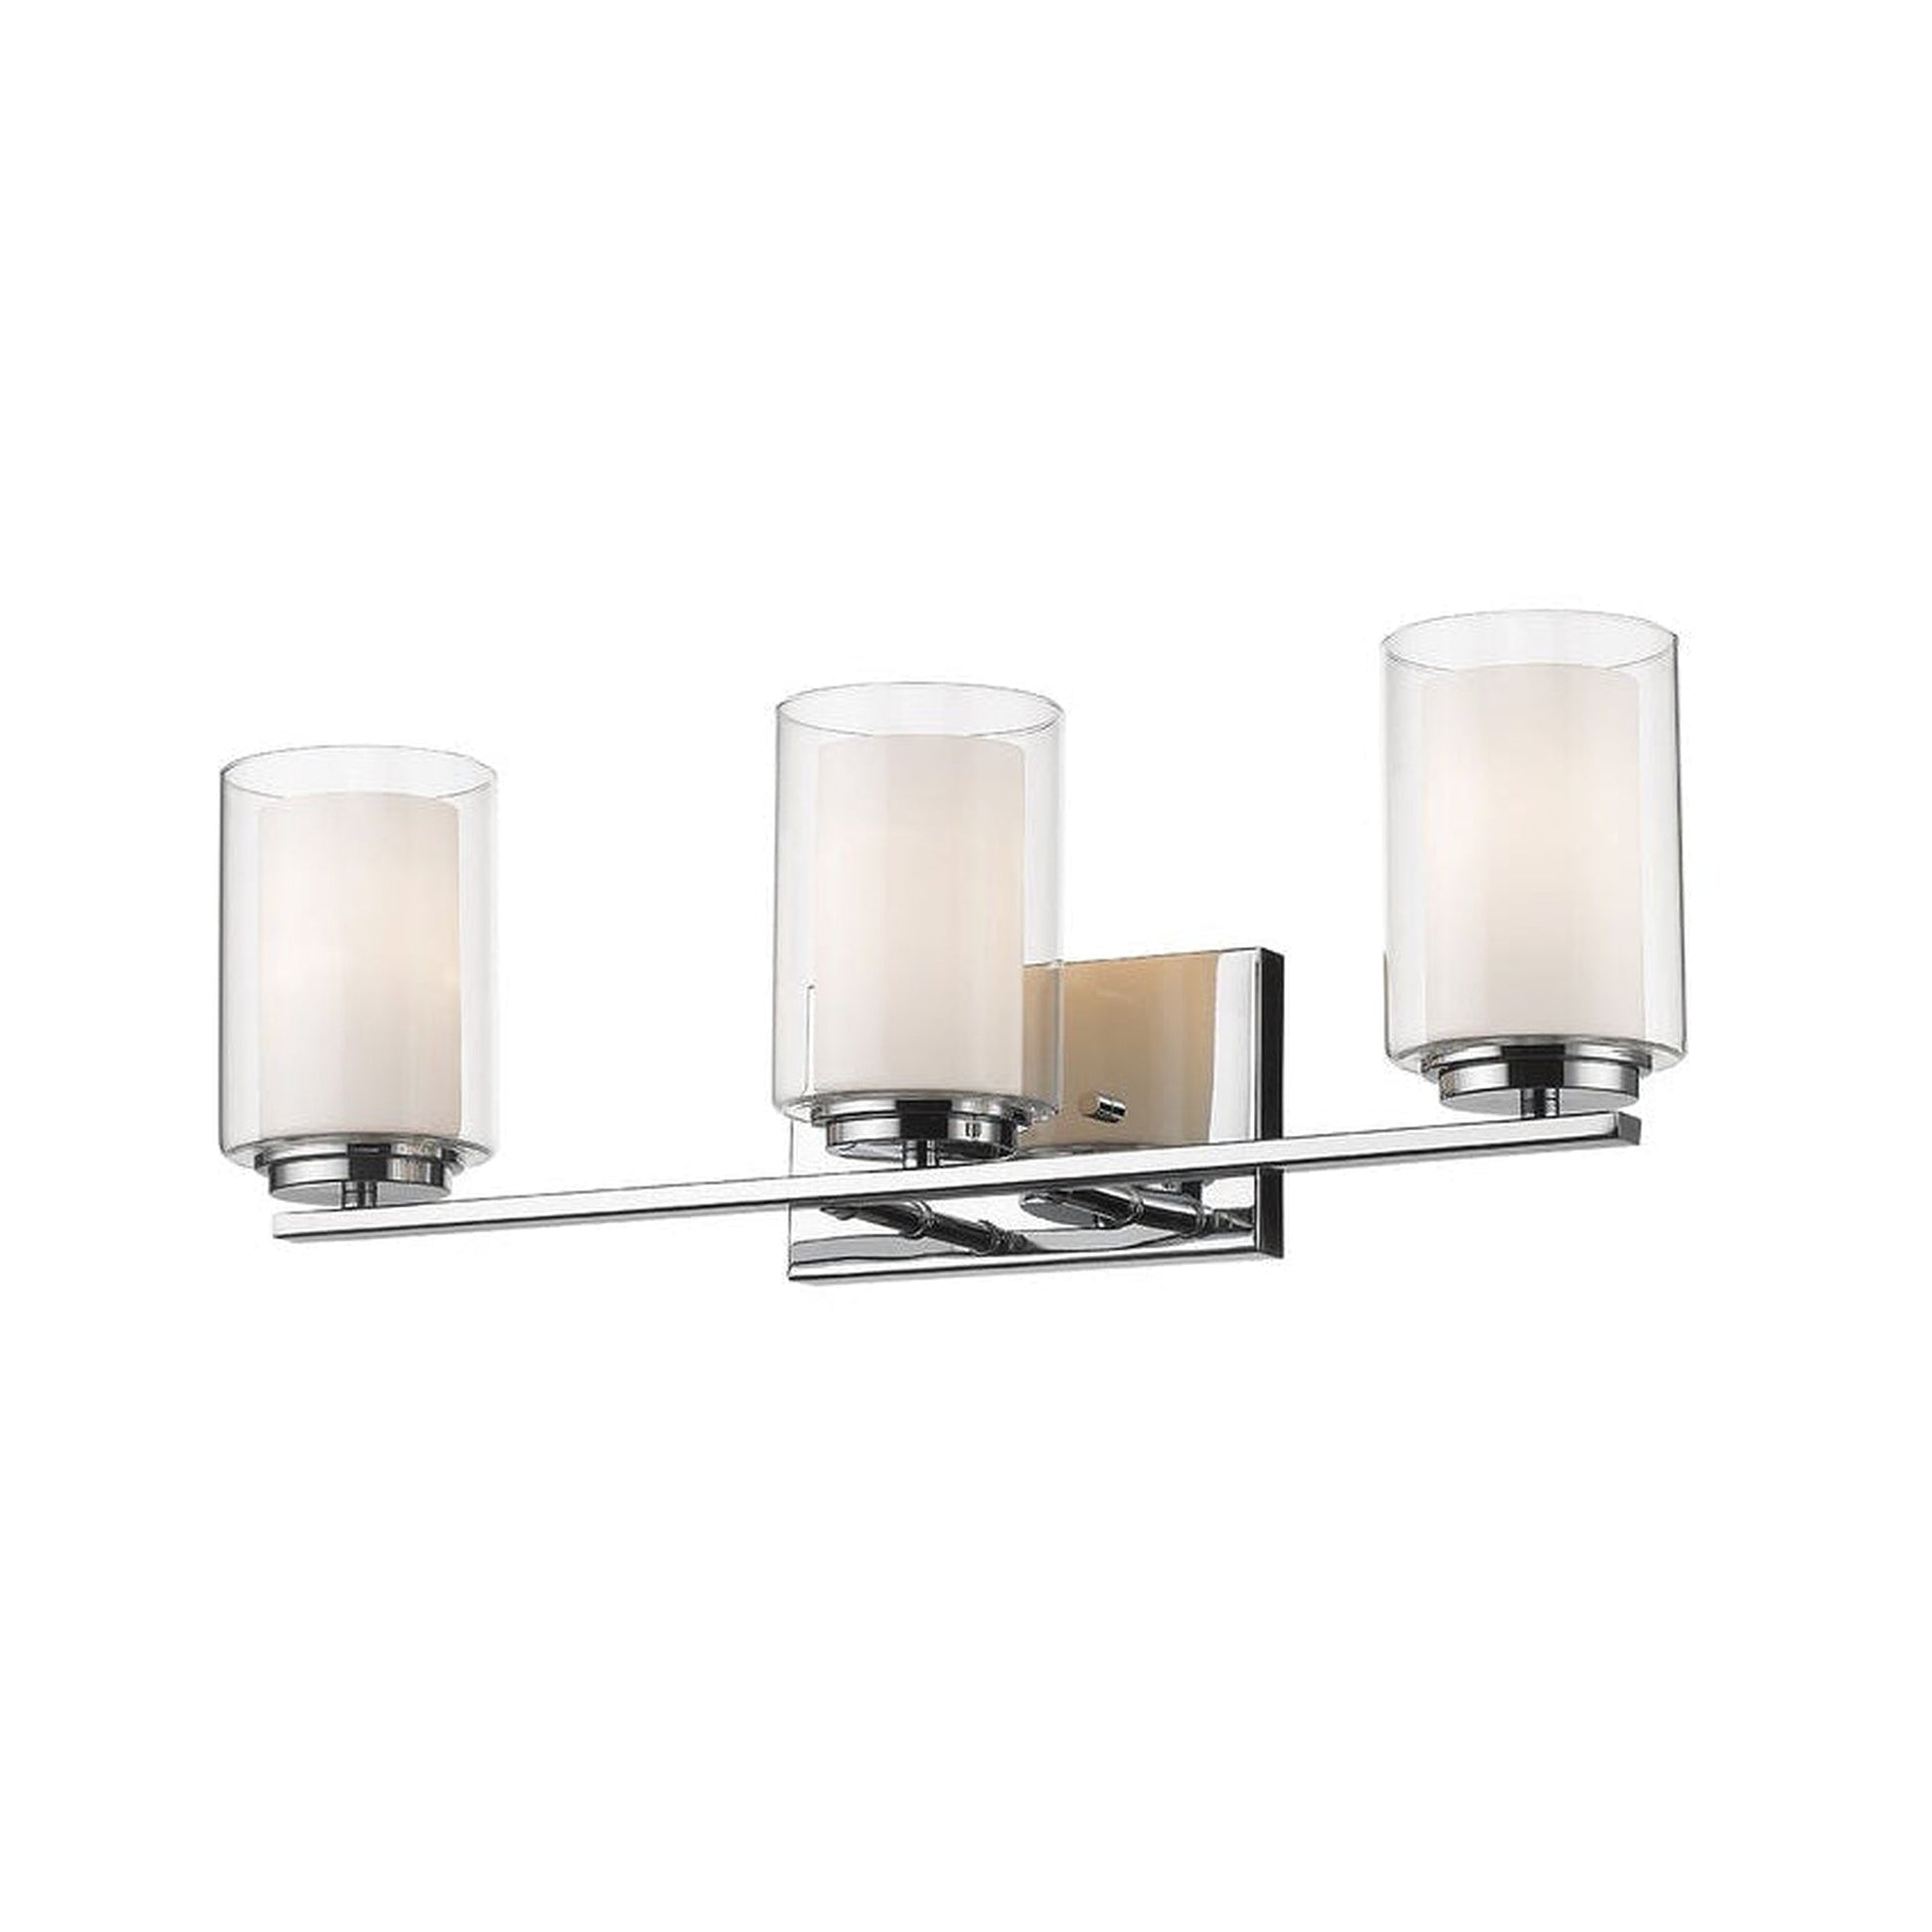 Z-Lite Willow 24" 3-Light Chrome Vanity Light With Clear and Matte Opal Glass Shade